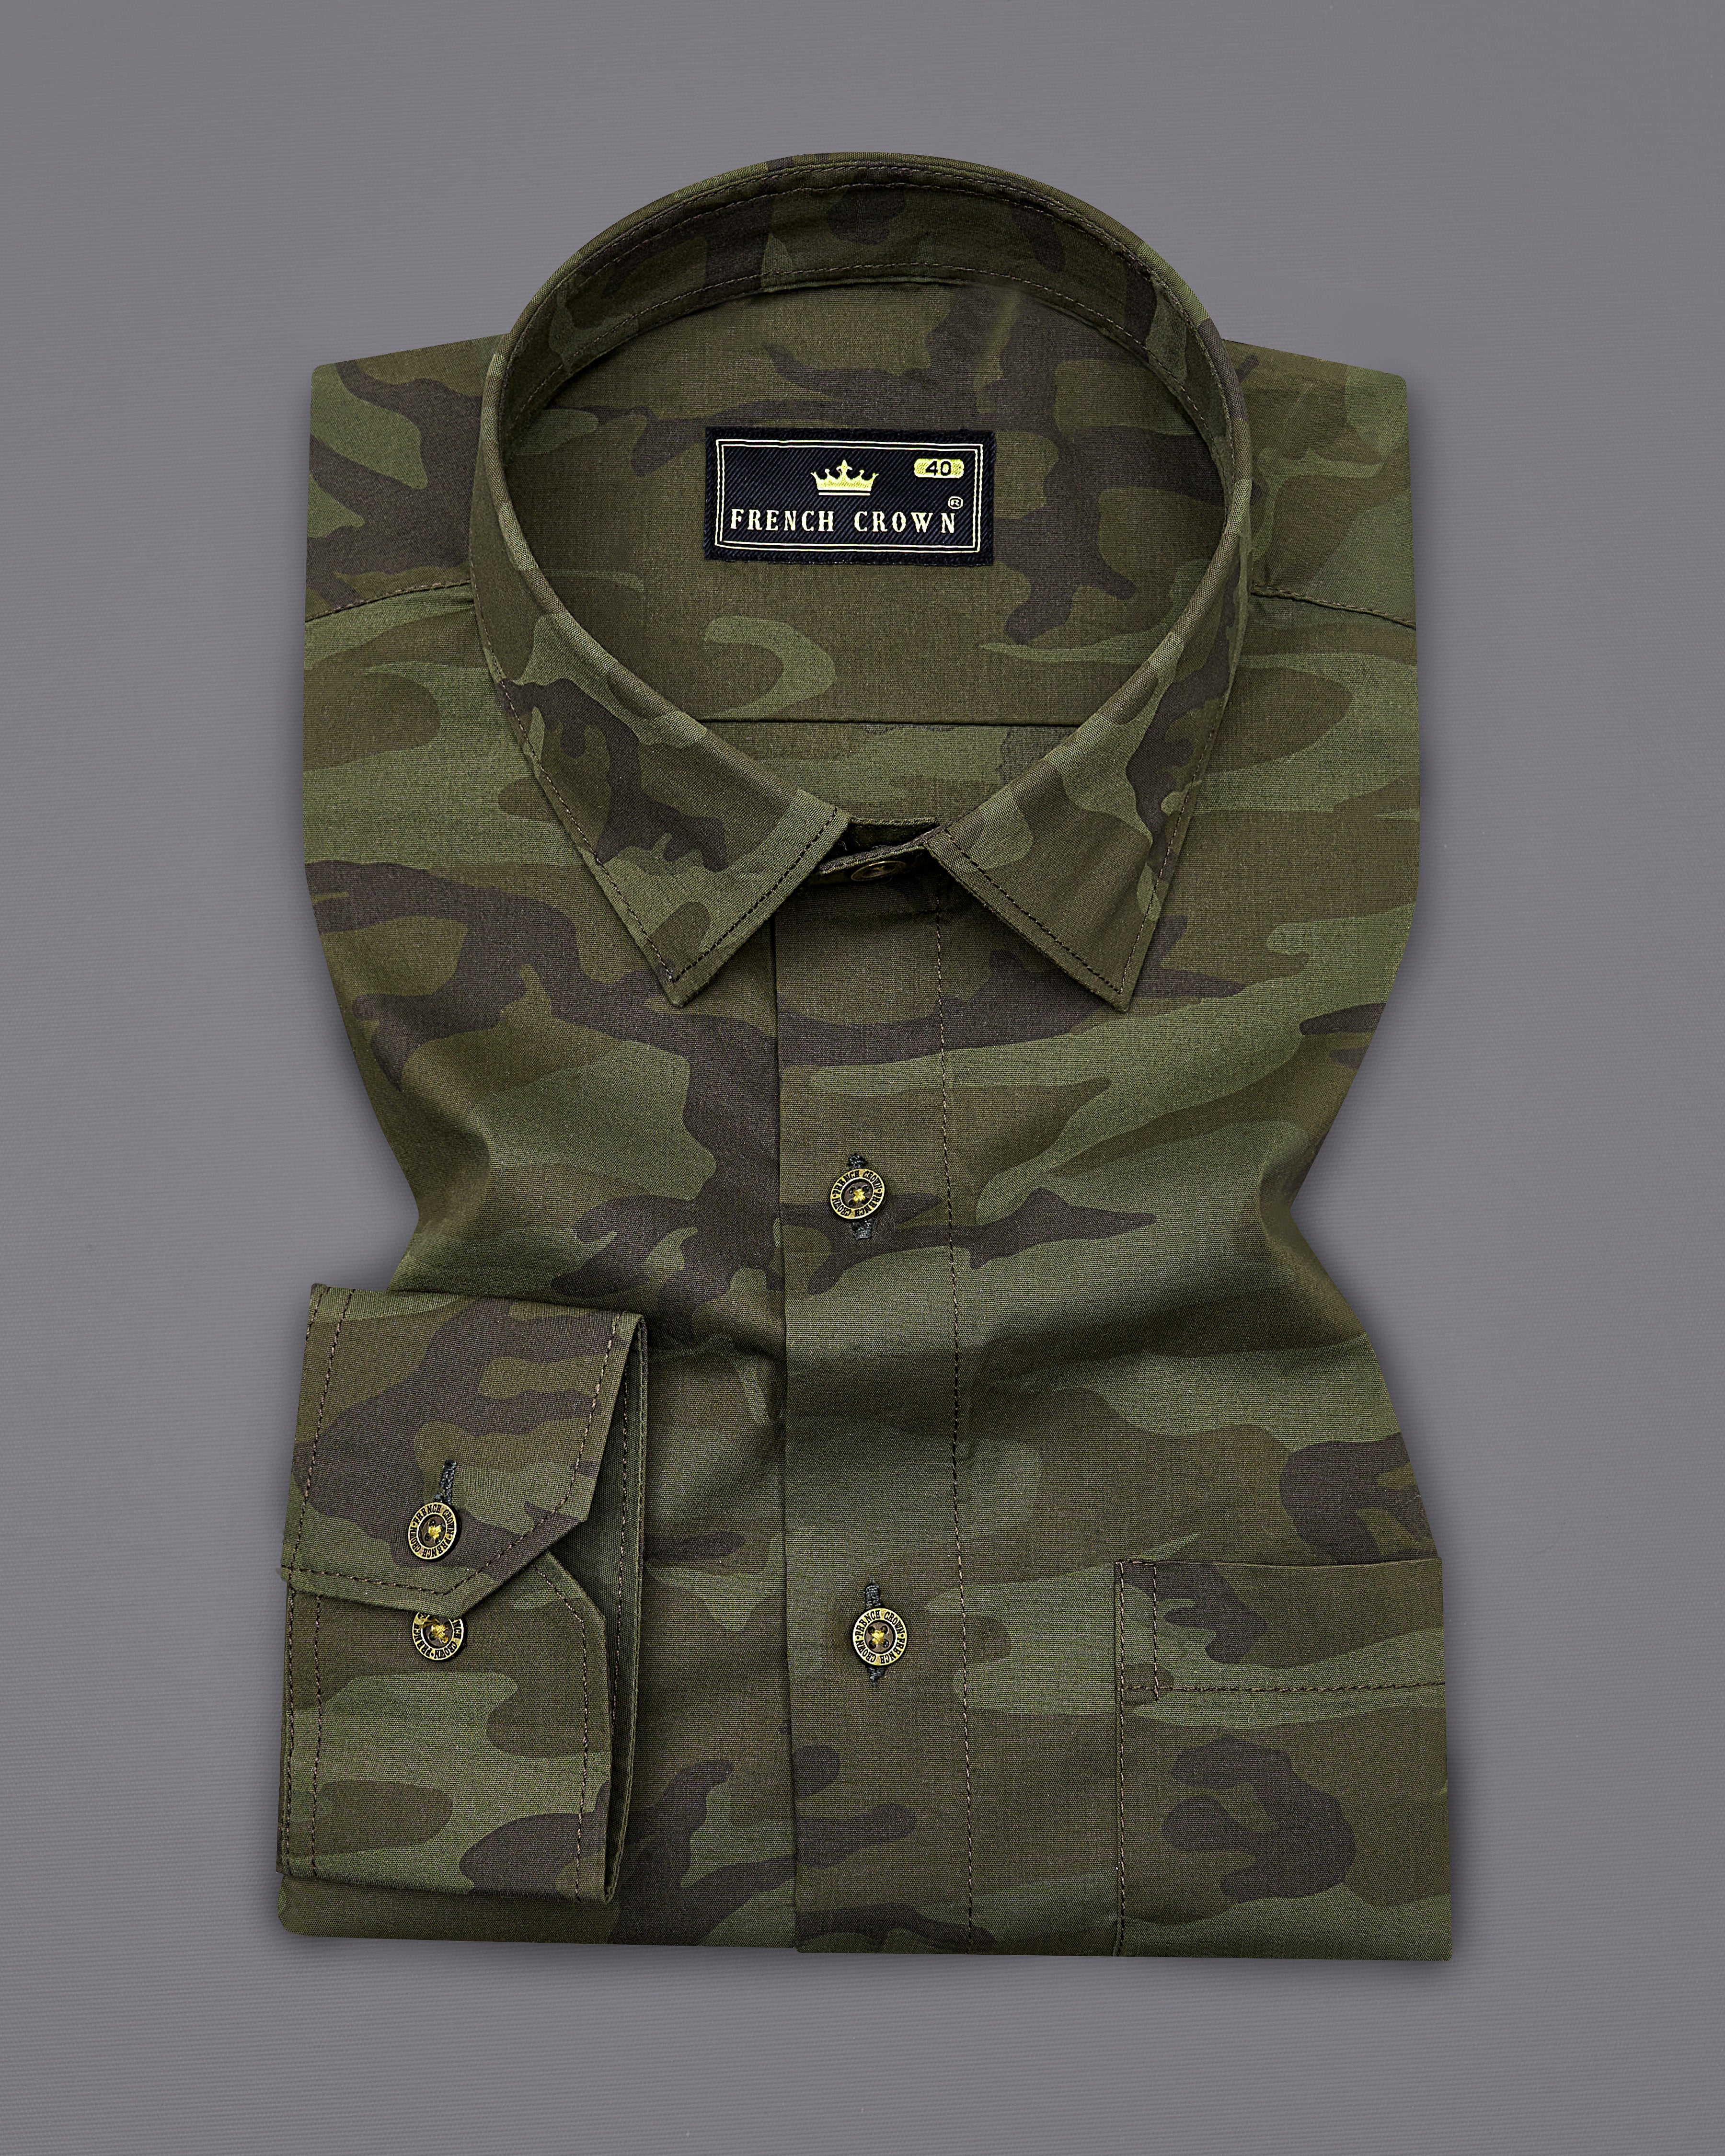 Taupe Green with Finch Green Camouflage Printed Royal Oxford Shirt 8893-MB-38, 8893-MB-H-38,  8893-MB-39,  8893-MB-H-39,  8893-MB-40,  8893-MB-H-40,  8893-MB-42,  8893-MB-H-42,  8893-MB-44,  8893-MB-H-44,  8893-MB-46,  8893-MB-H-46,  8893-MB-48,  8893-MB-H-48,  8893-MB-50,  8893-MB-H-50,  8893-MB-52,  8893-MB-H-52